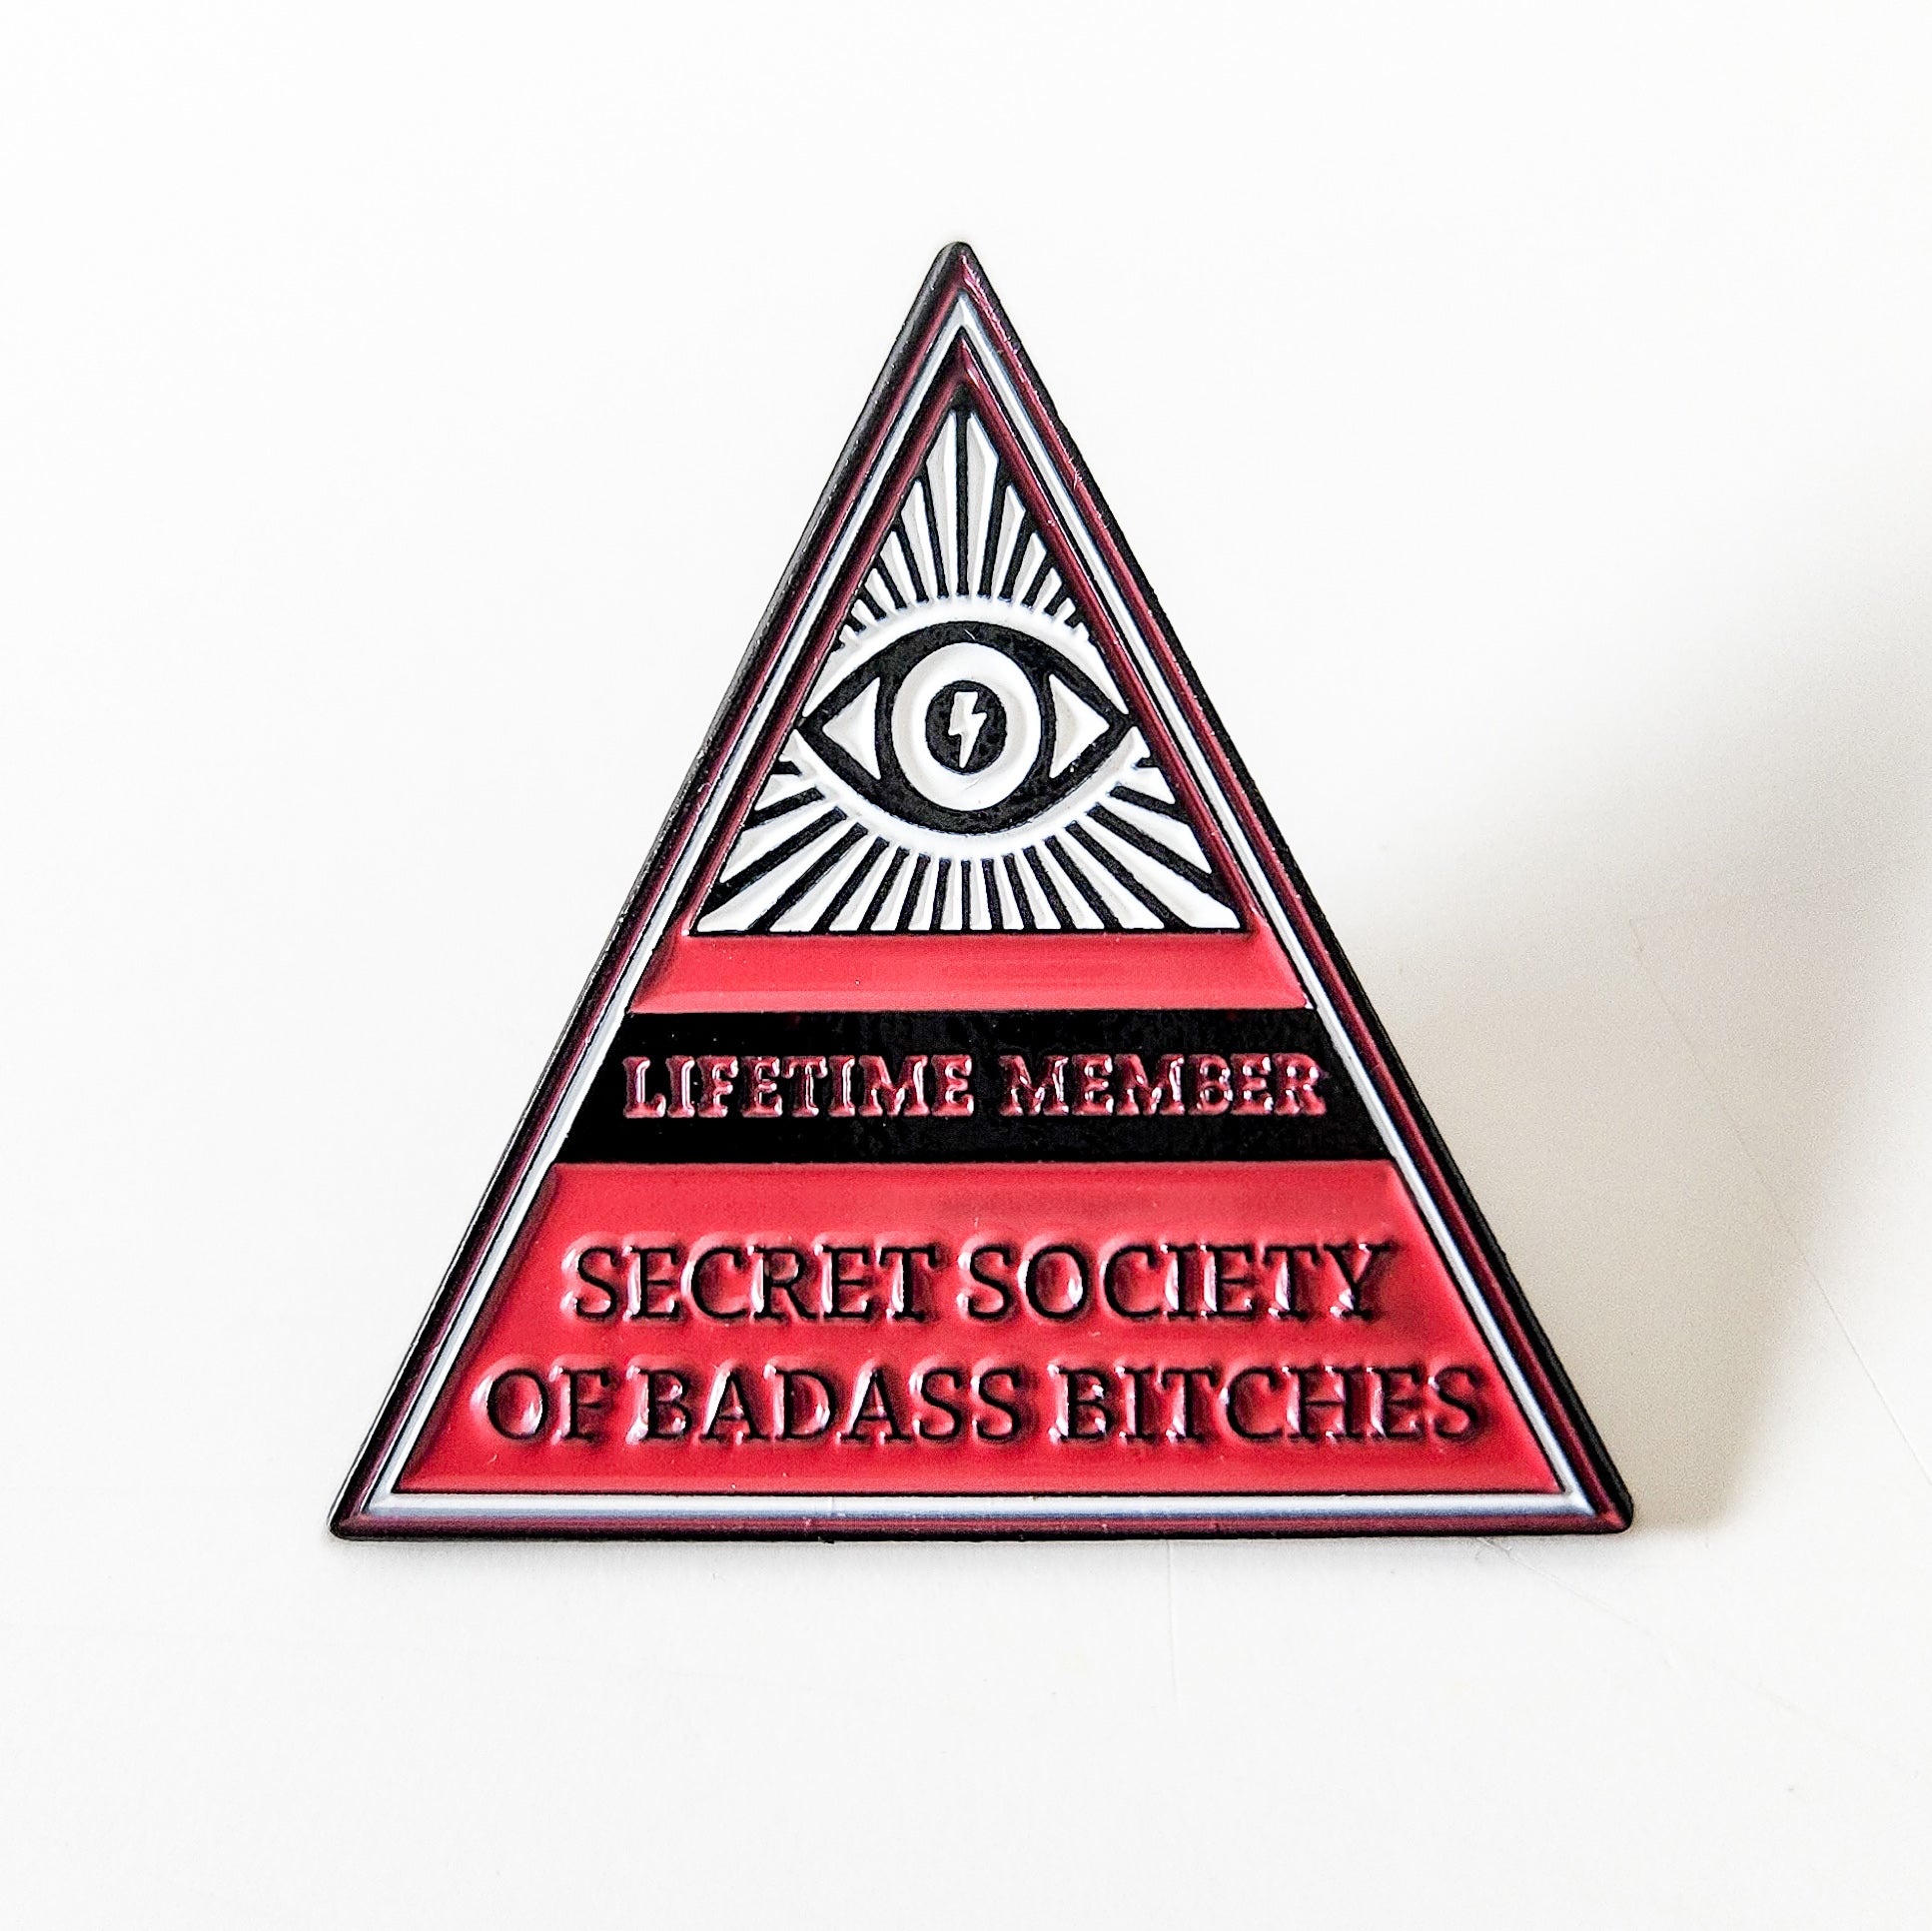 Secret Society looking for new members